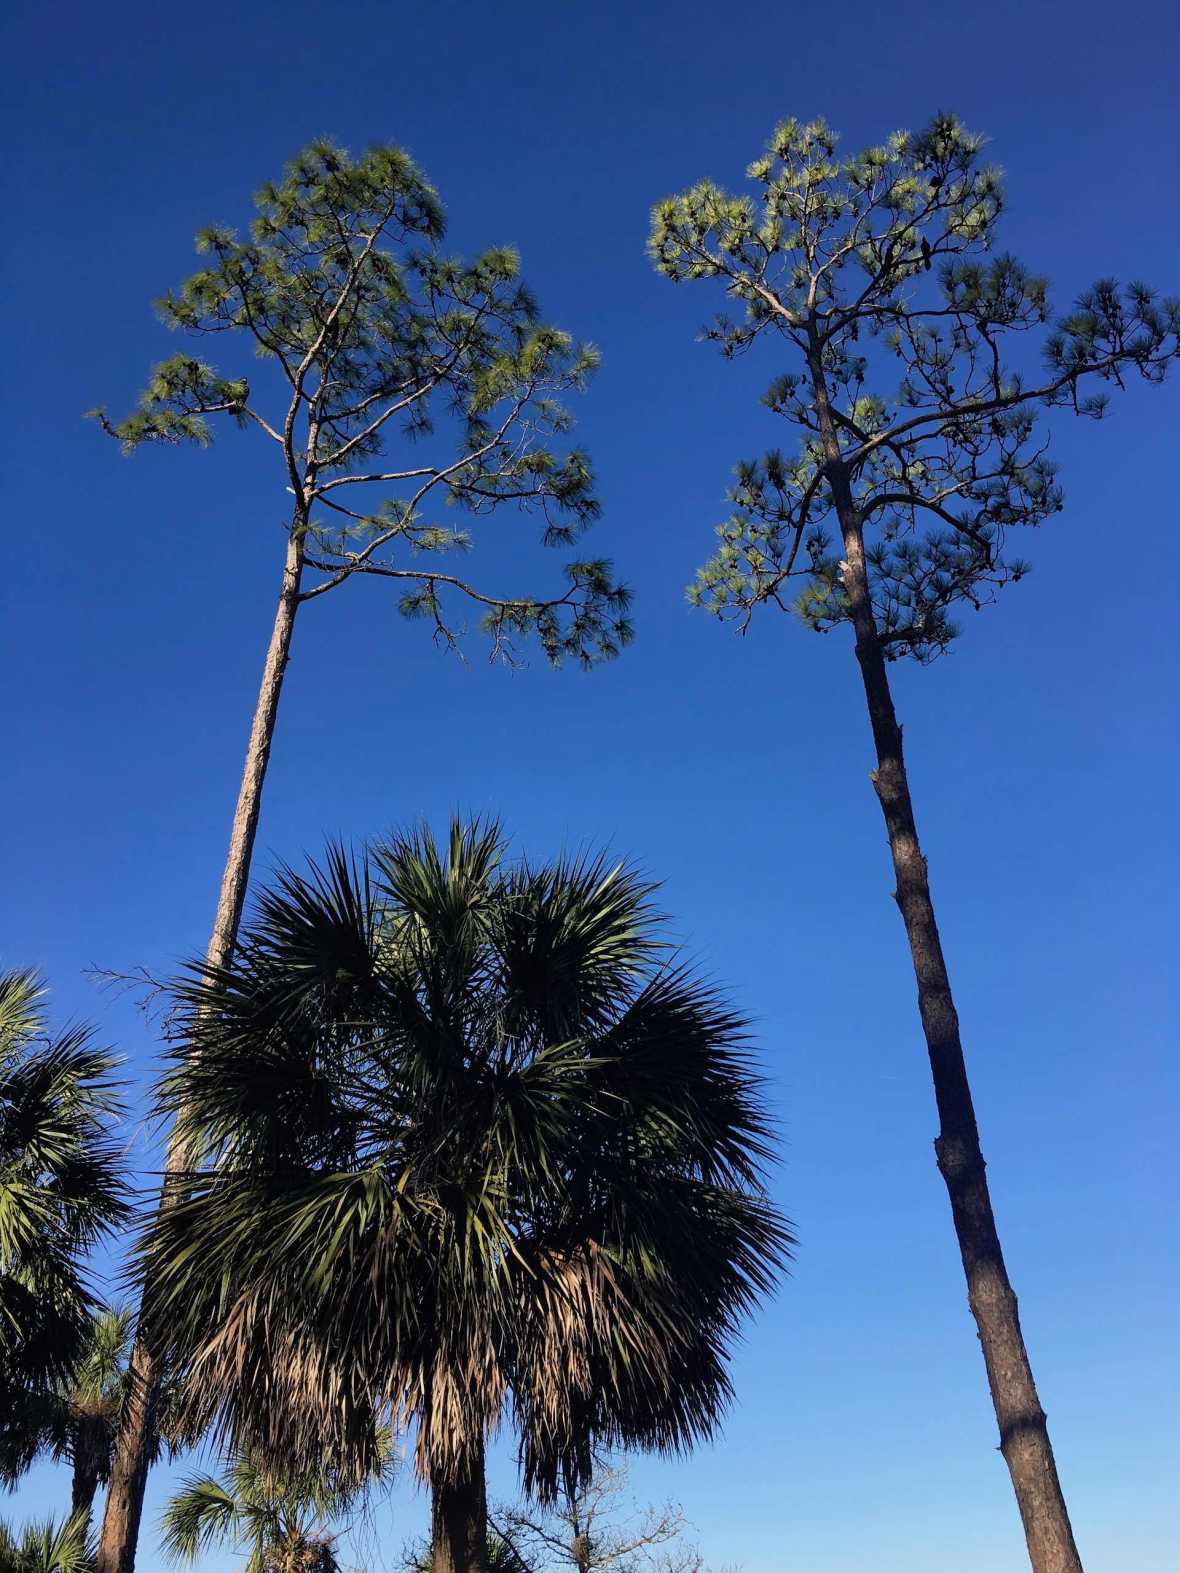 Tall pines and palm trees along the salt marsh at Shell Mound